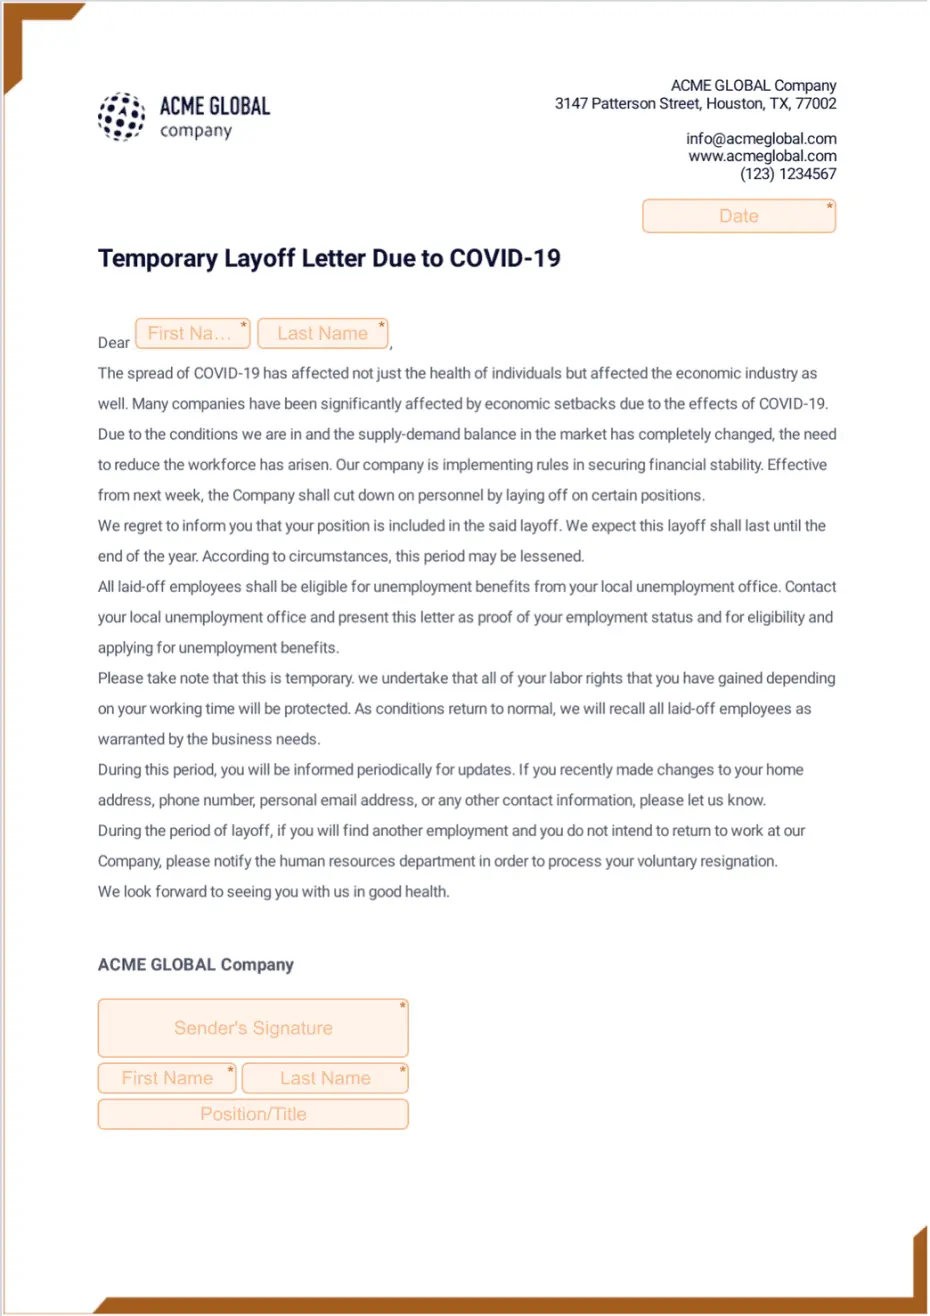 Temporary Layoff Letter Template Due to COVID 19